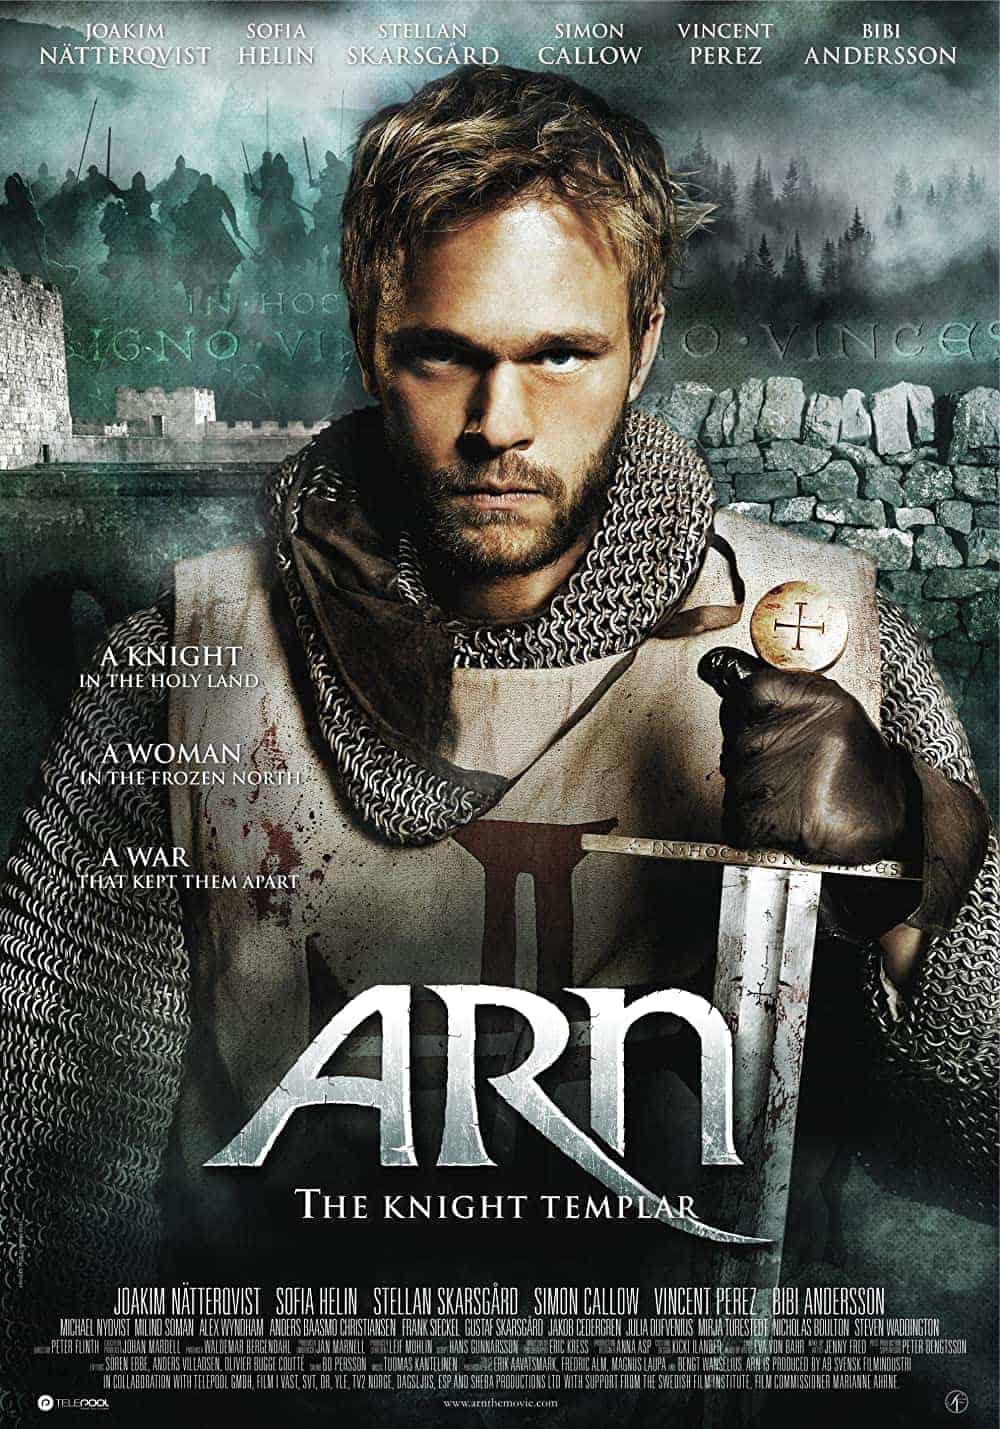 Arn The Knight Templar (2007) Best Knight Movies to Add in Your Watchlist